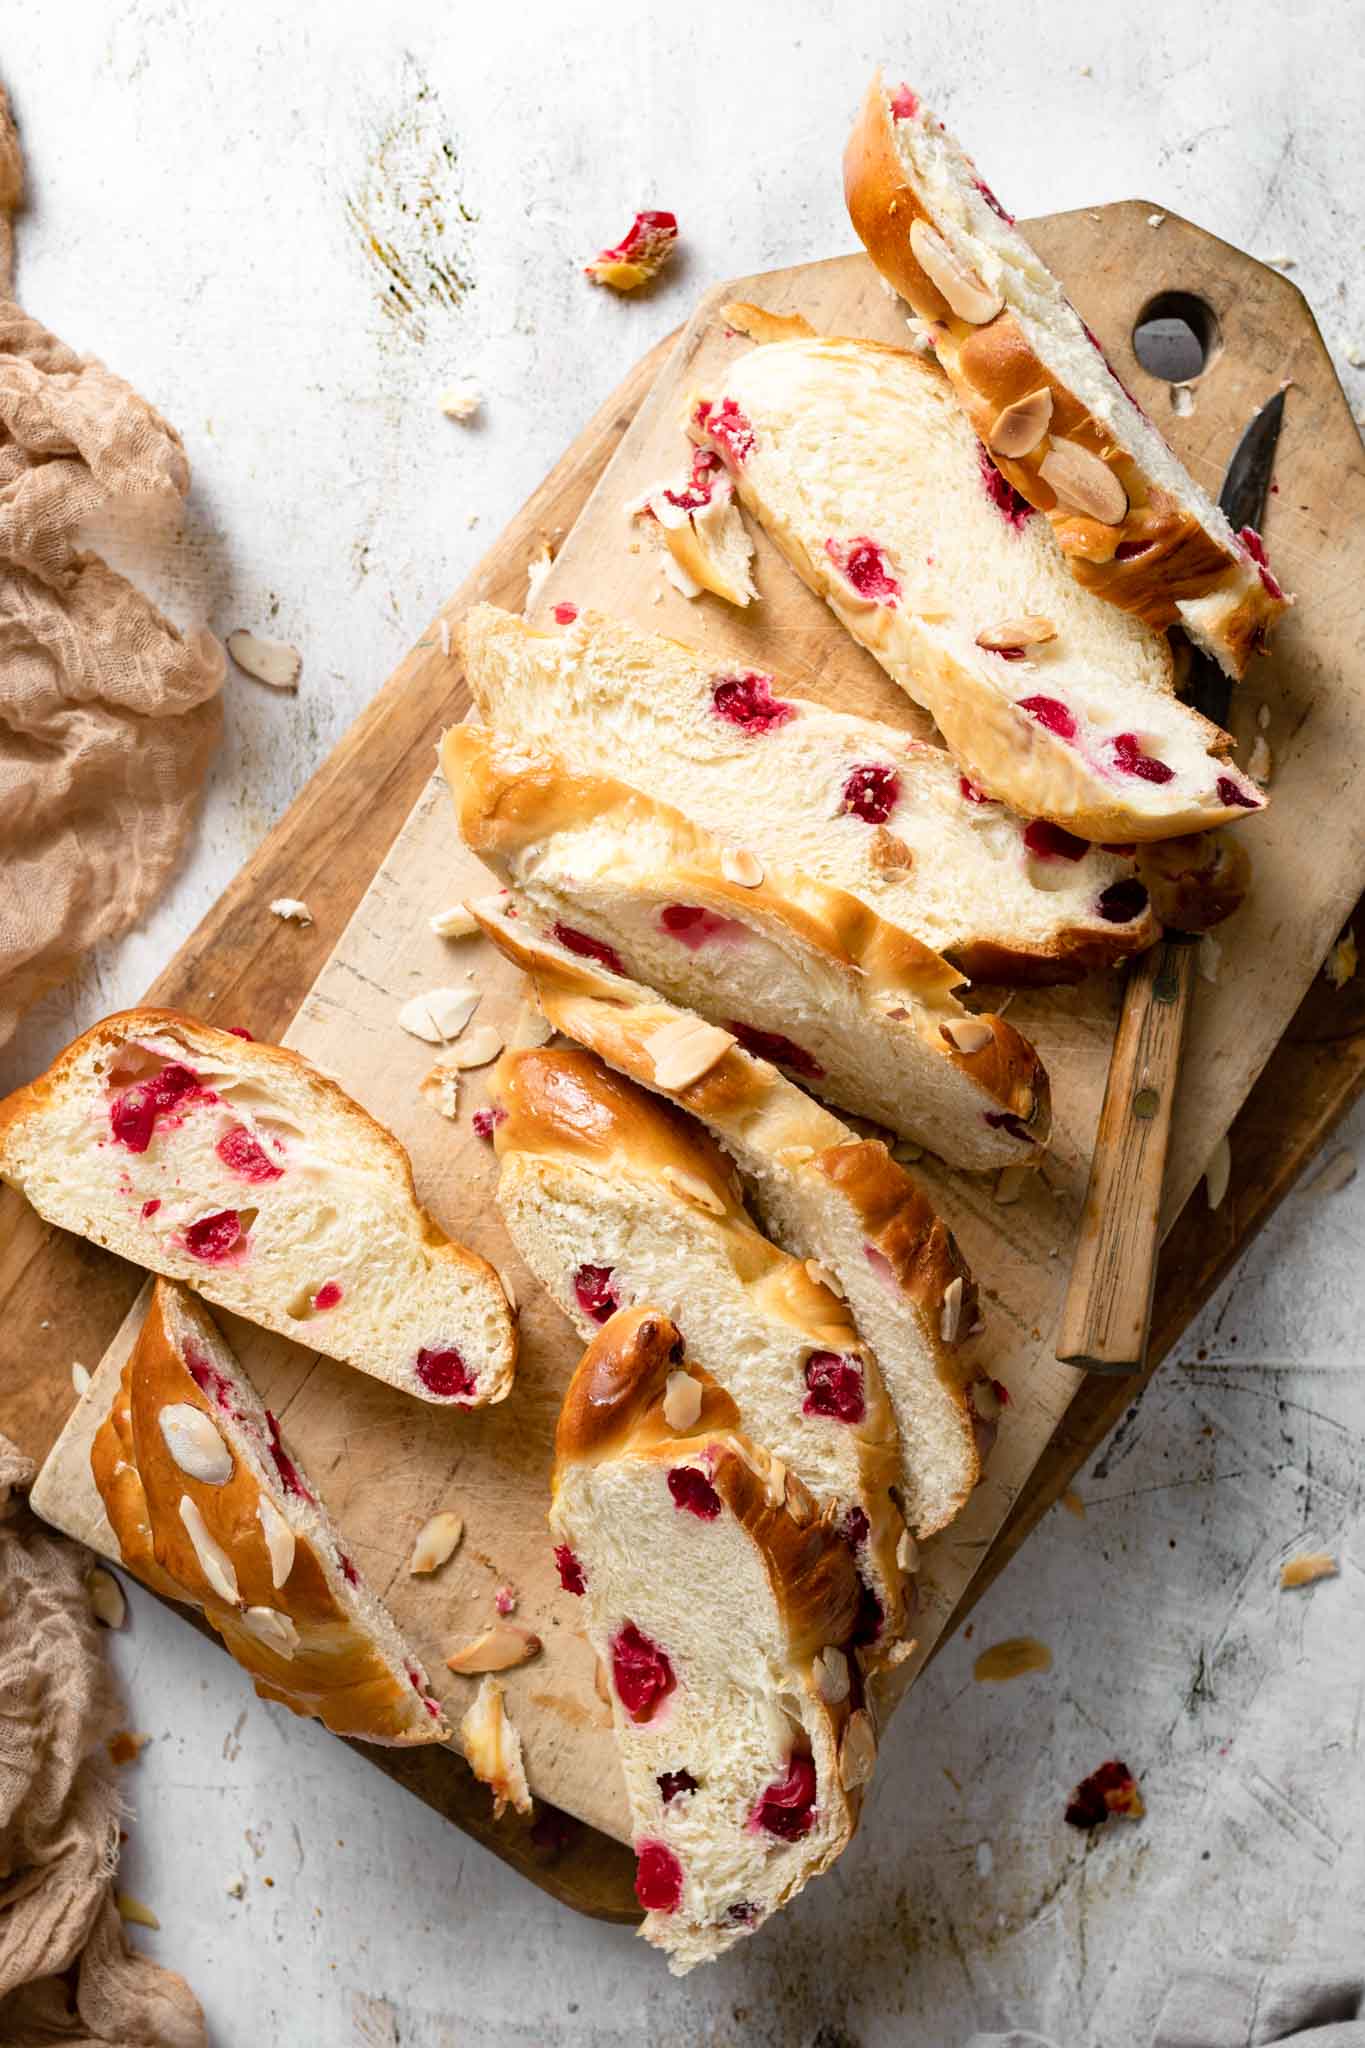 Homemade challah bread with cranberries and almonds